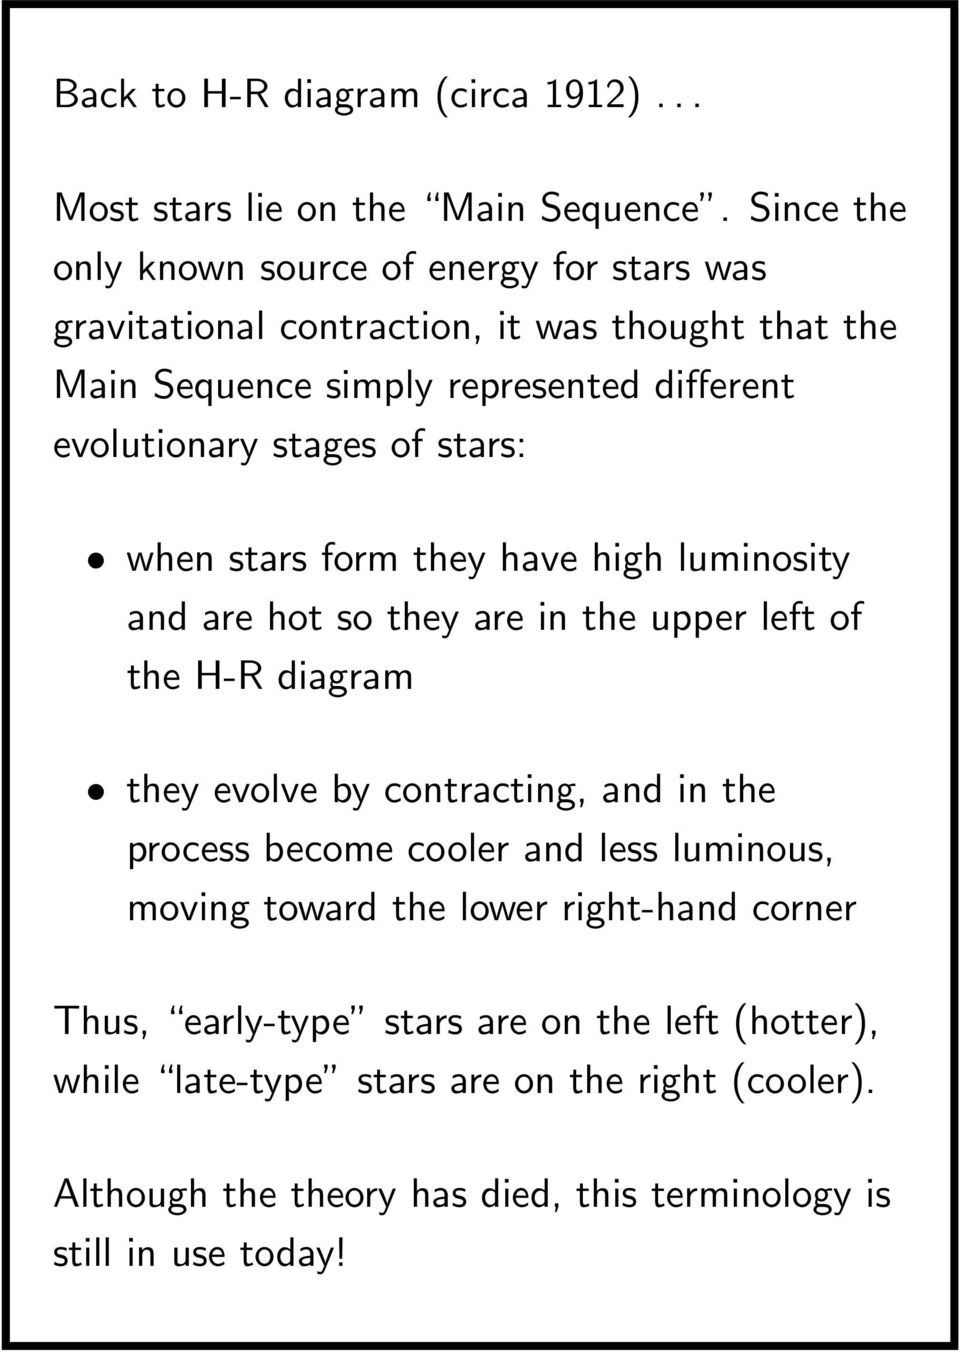 stages of stars: when stars form they have high luminosity and are hot so they are in the upper left of the H-R diagram they evolve by contracting, and in the